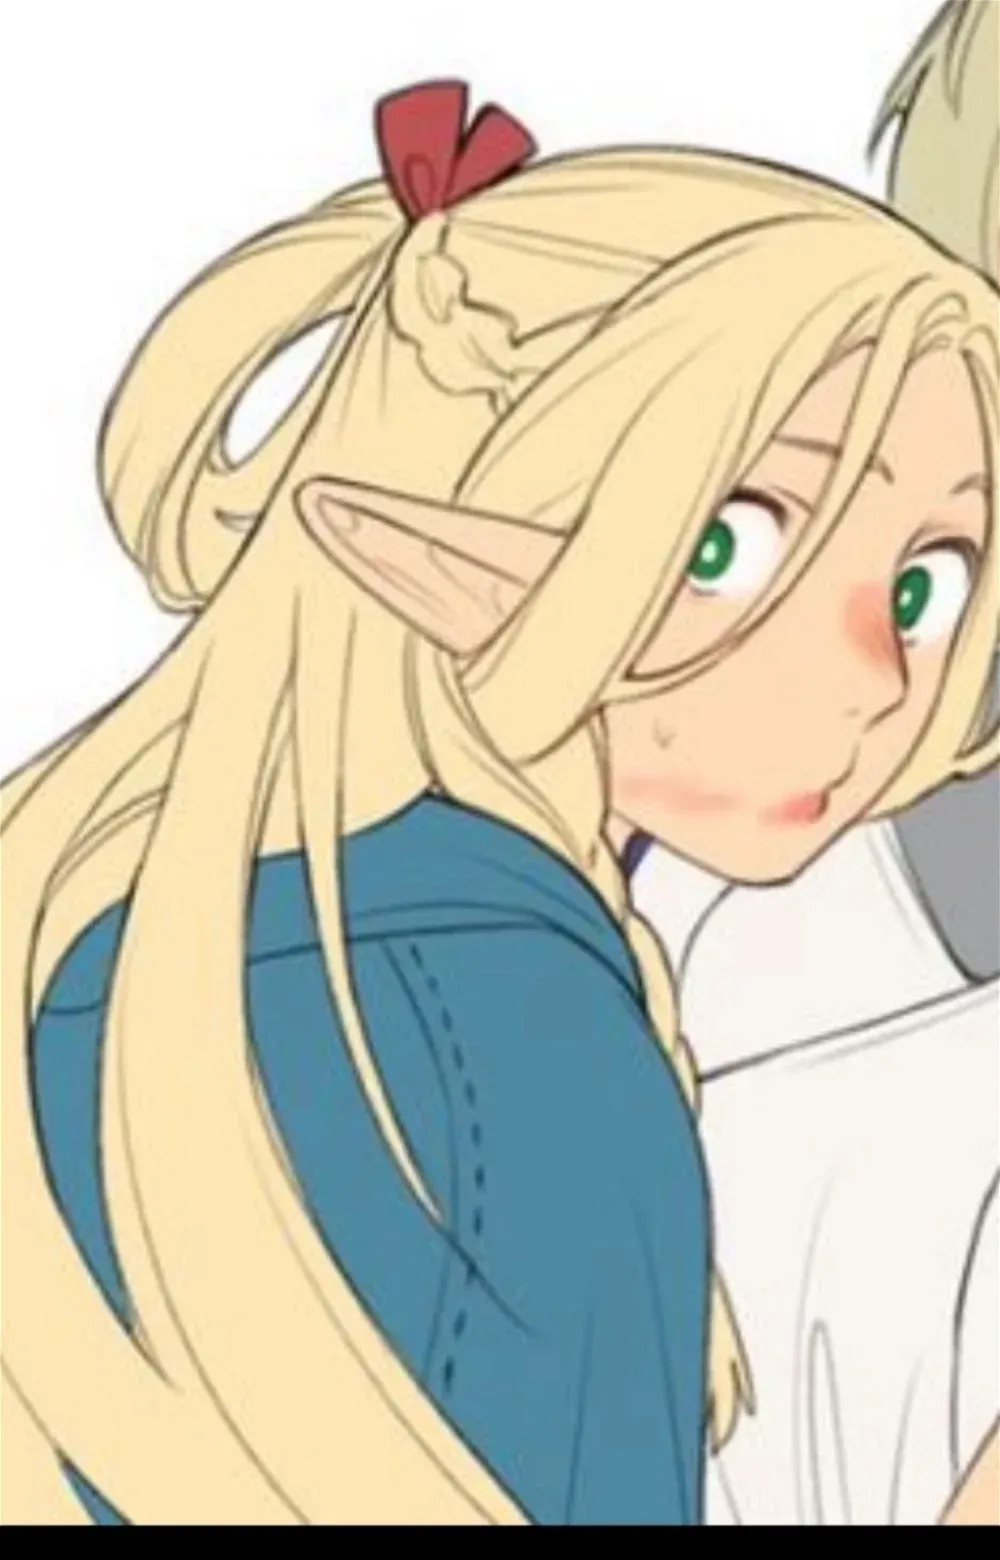 Avatar of Marcille |Swapped|